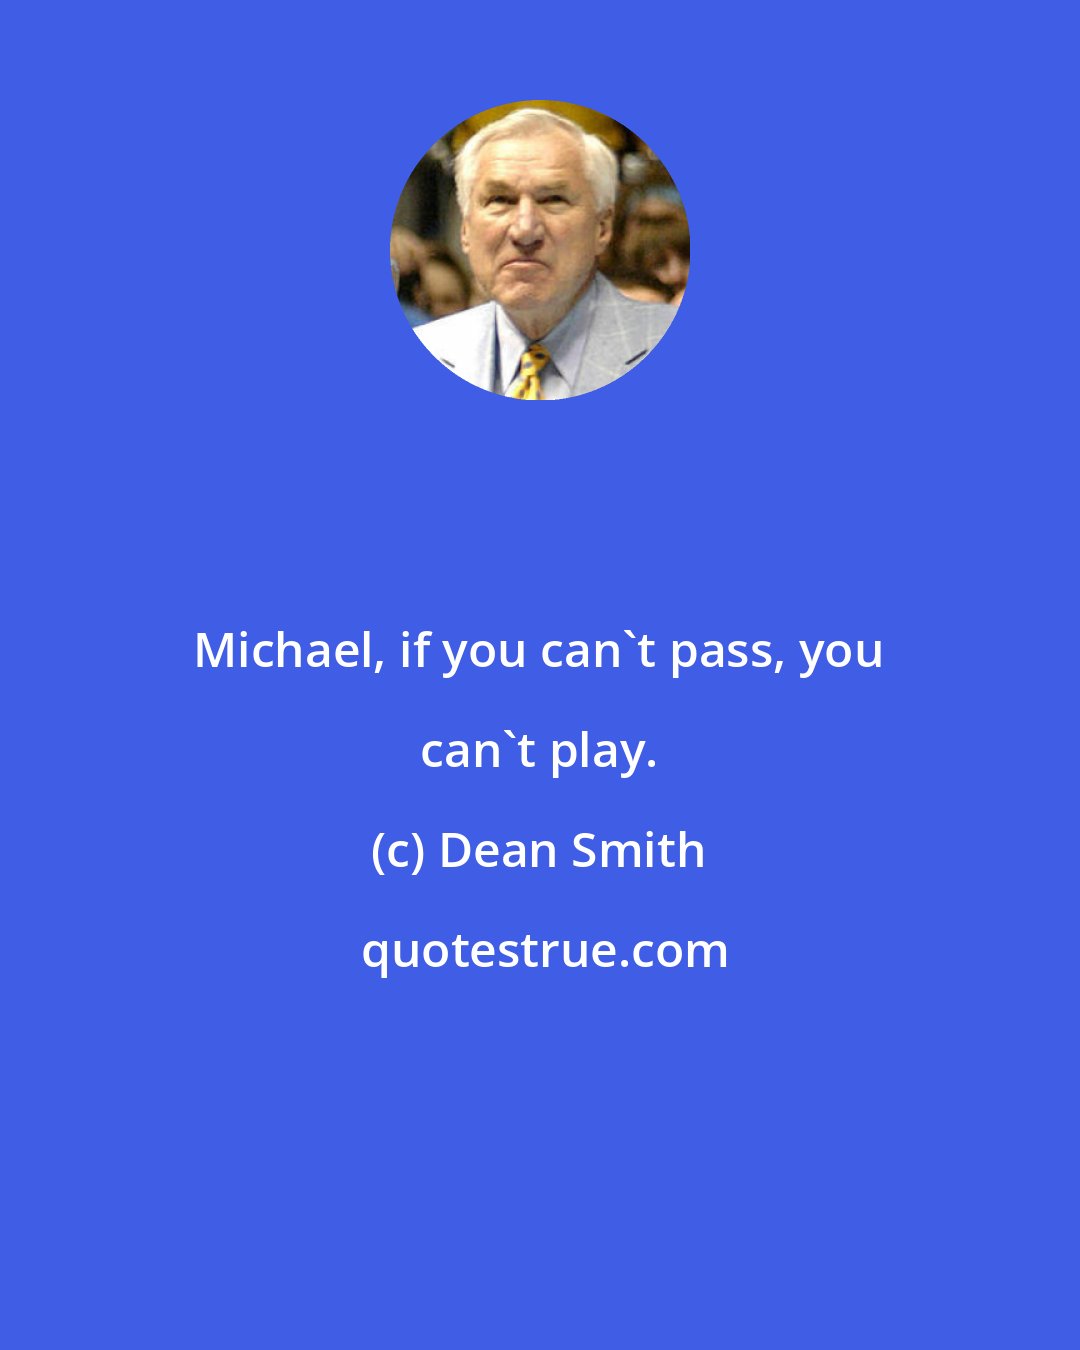 Dean Smith: Michael, if you can't pass, you can't play.